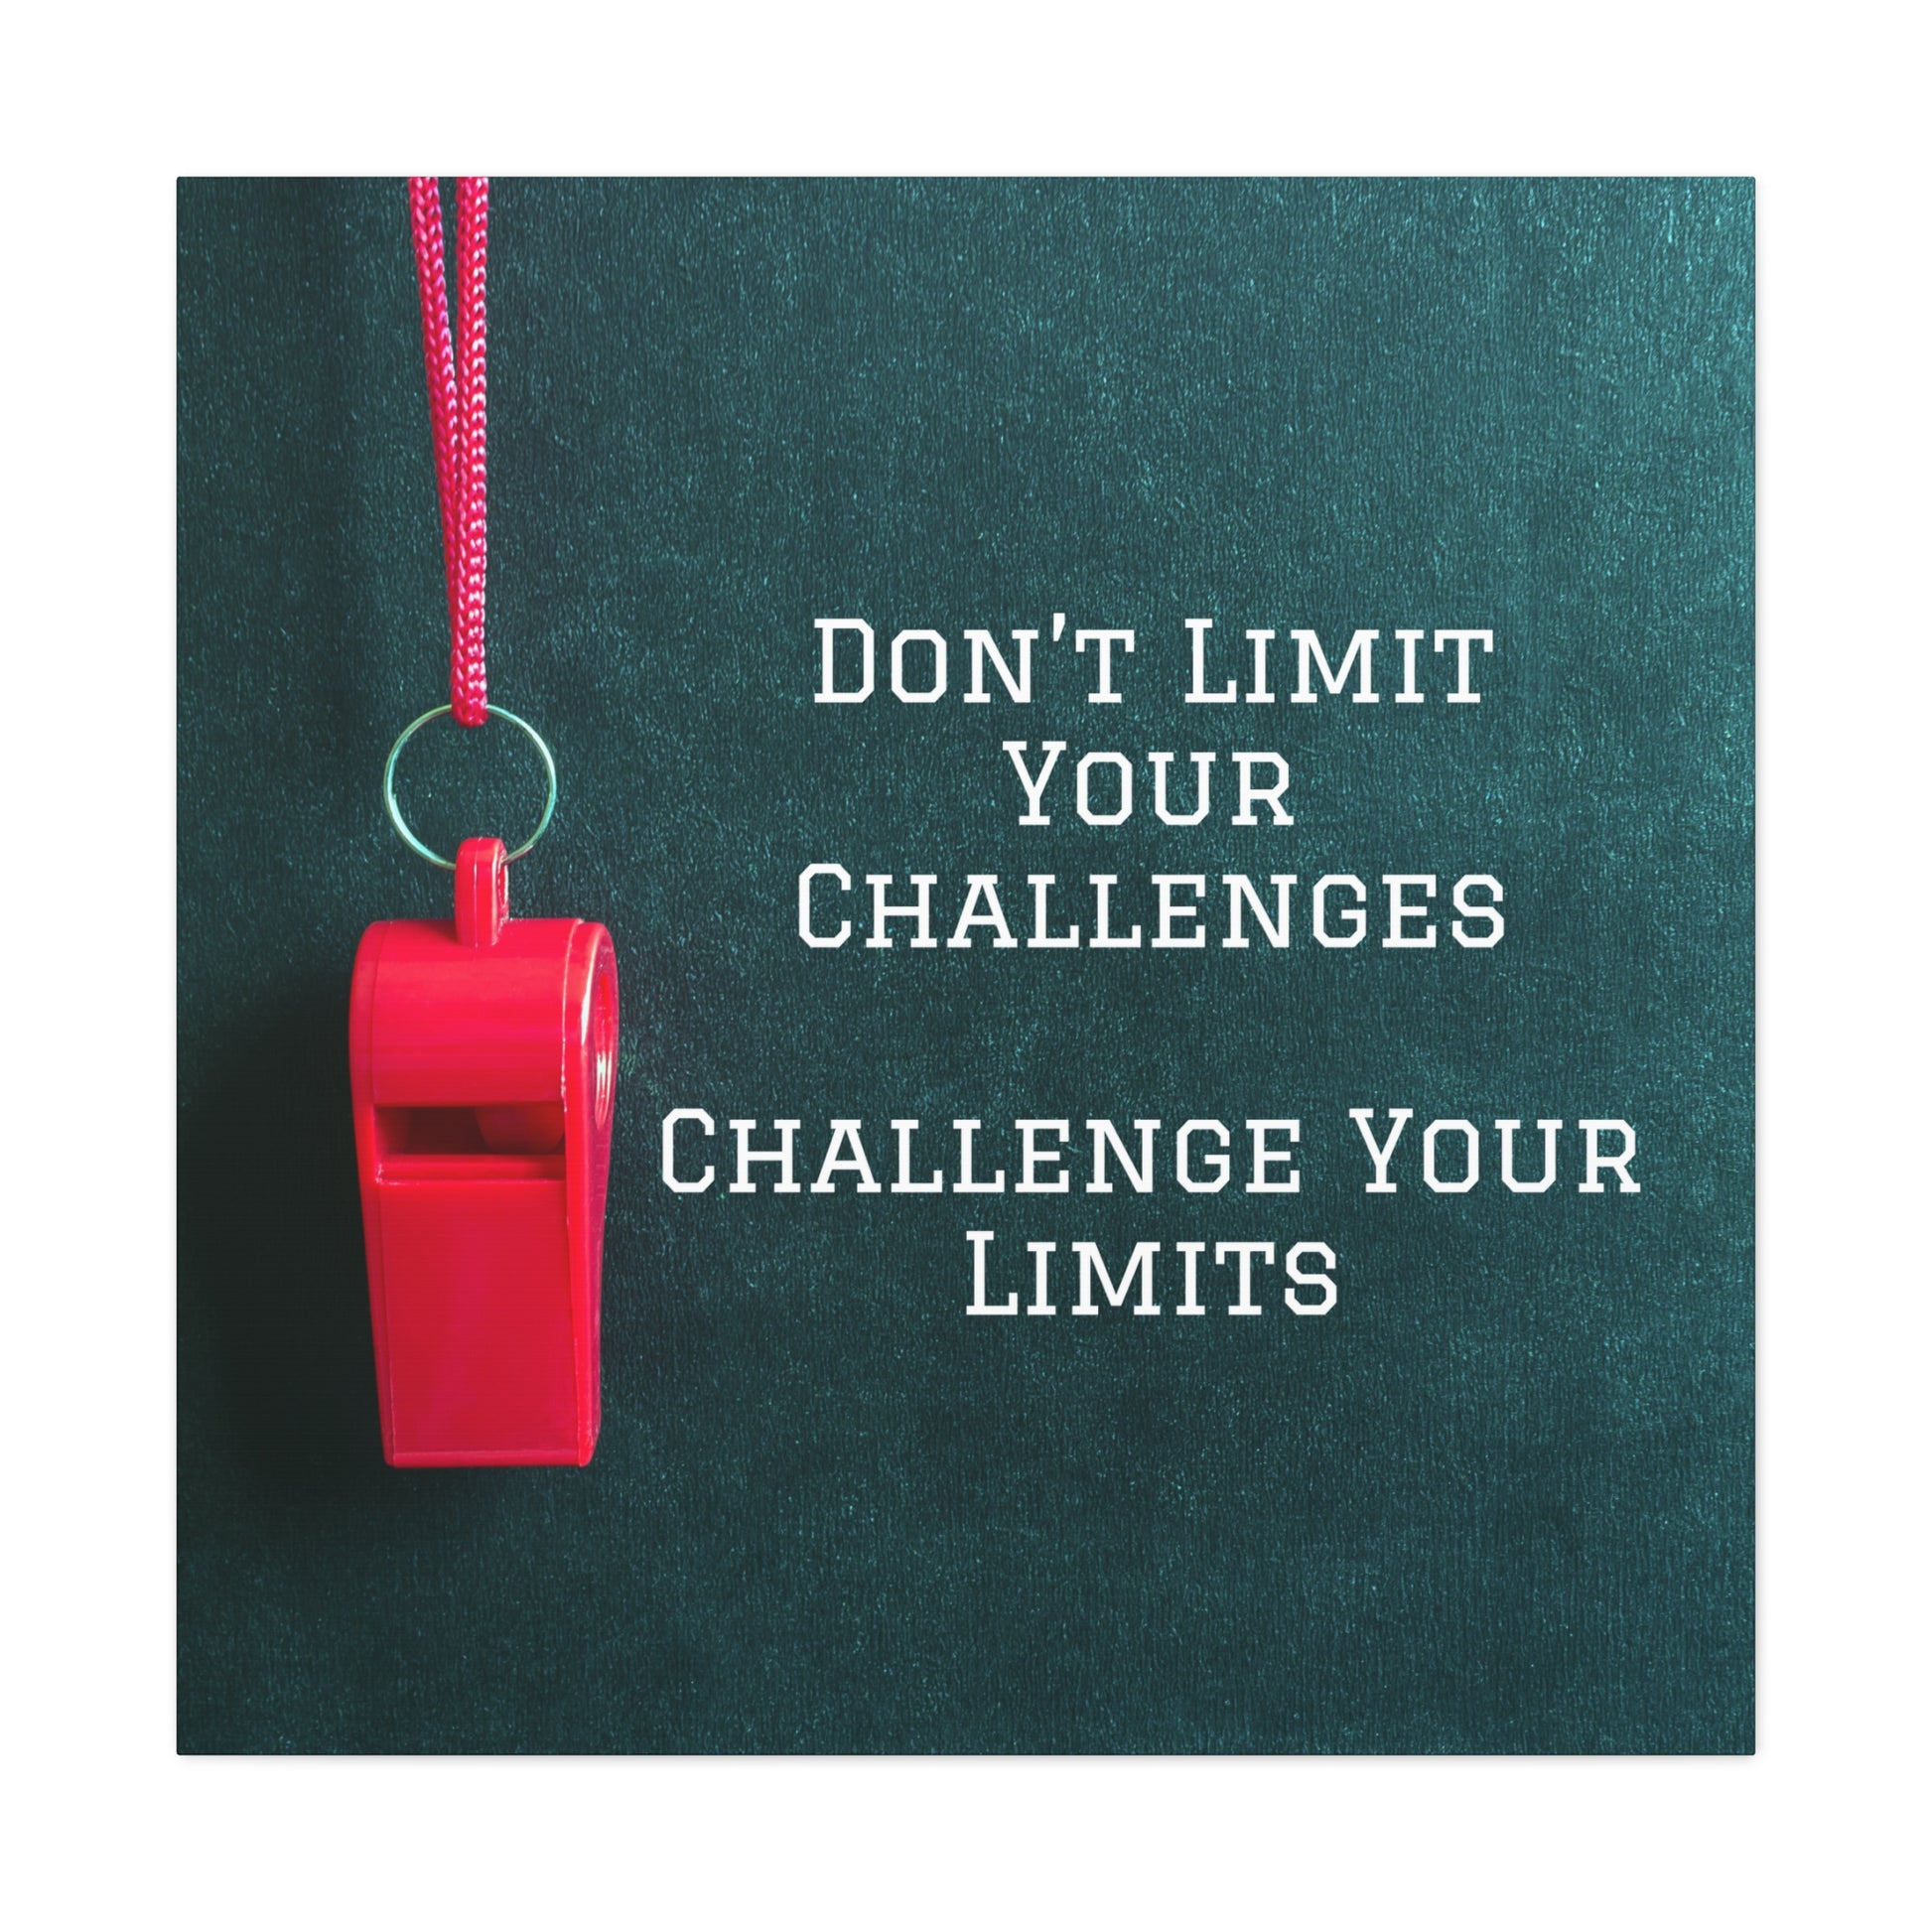 "Don't Limit Your Challenges" Wall Art - Weave Got Gifts - Unique Gifts You Won’t Find Anywhere Else!